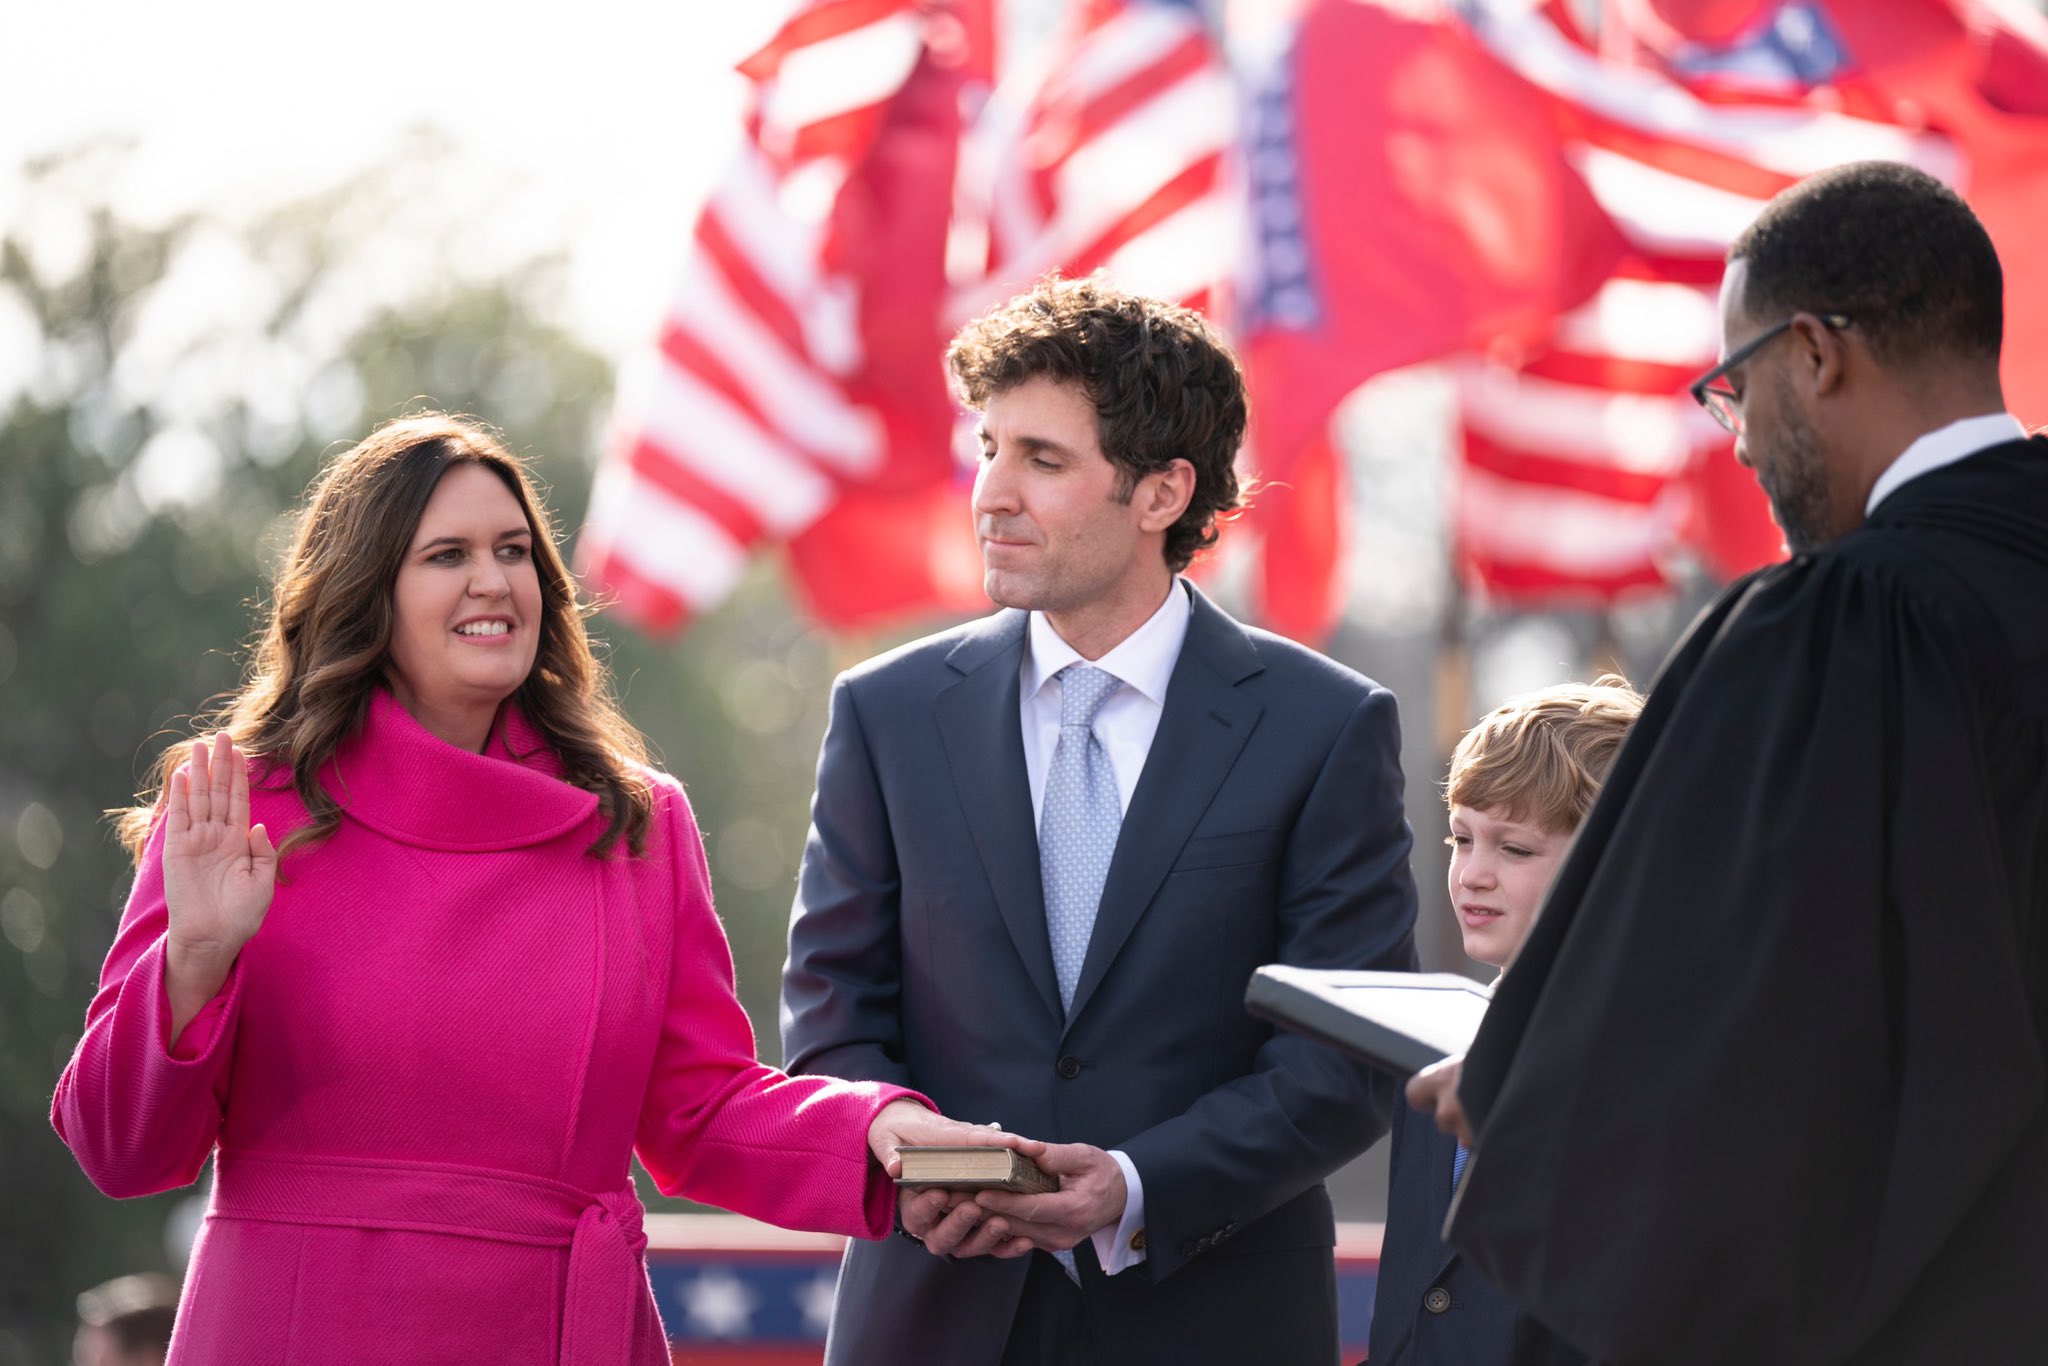 Sarah Huckabee Sanders becomes the 47th Governor of Arkansas: The first woman to occupy the position